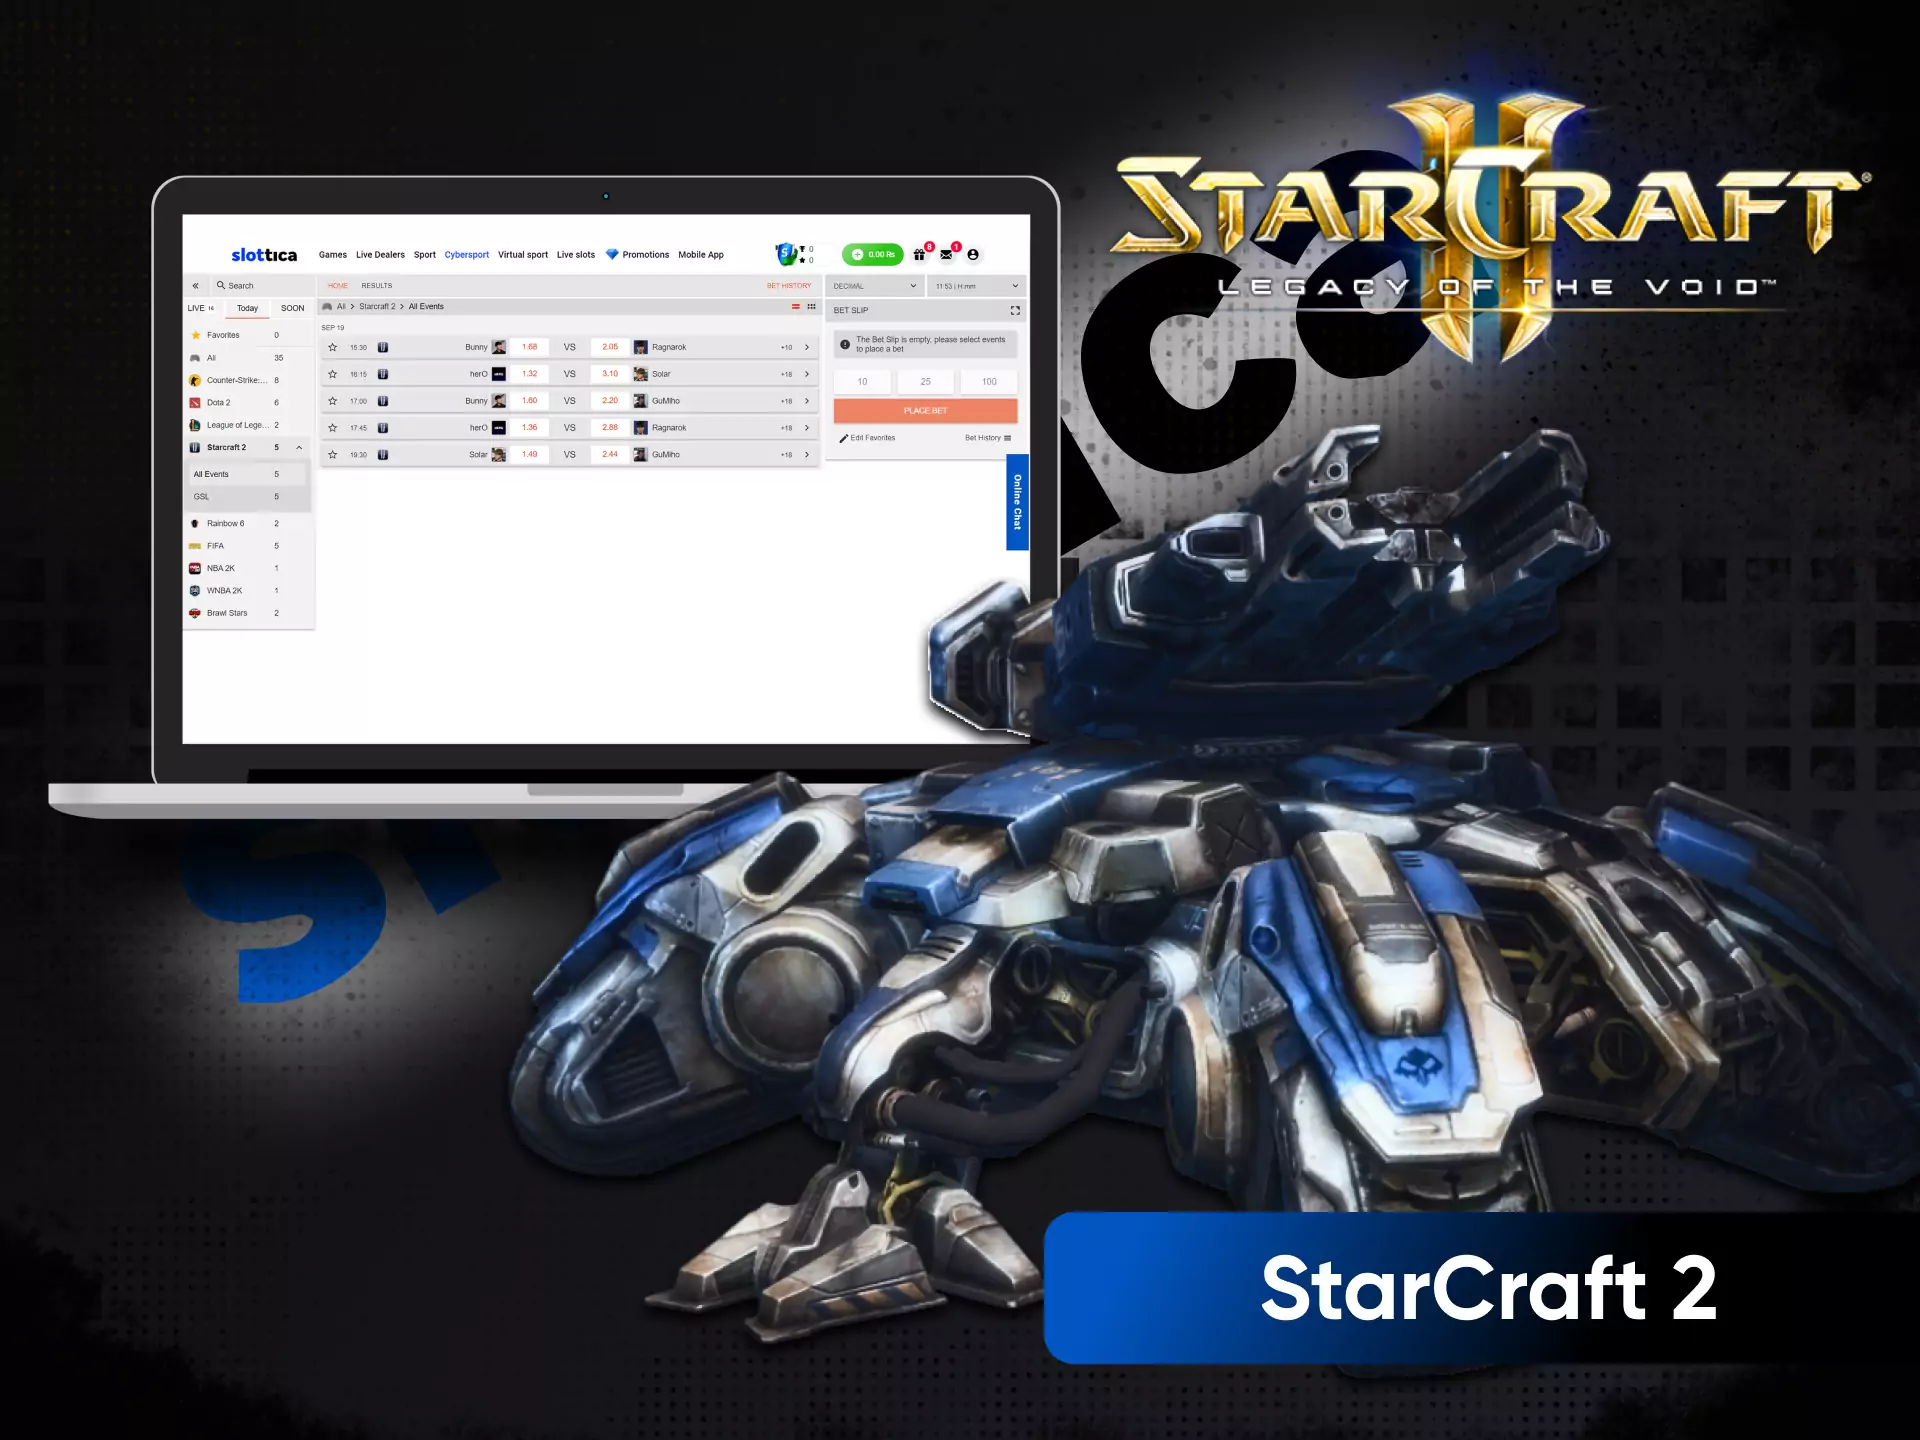 In the Slottica sportsbook, you can place bets on Starcraft 2 events.